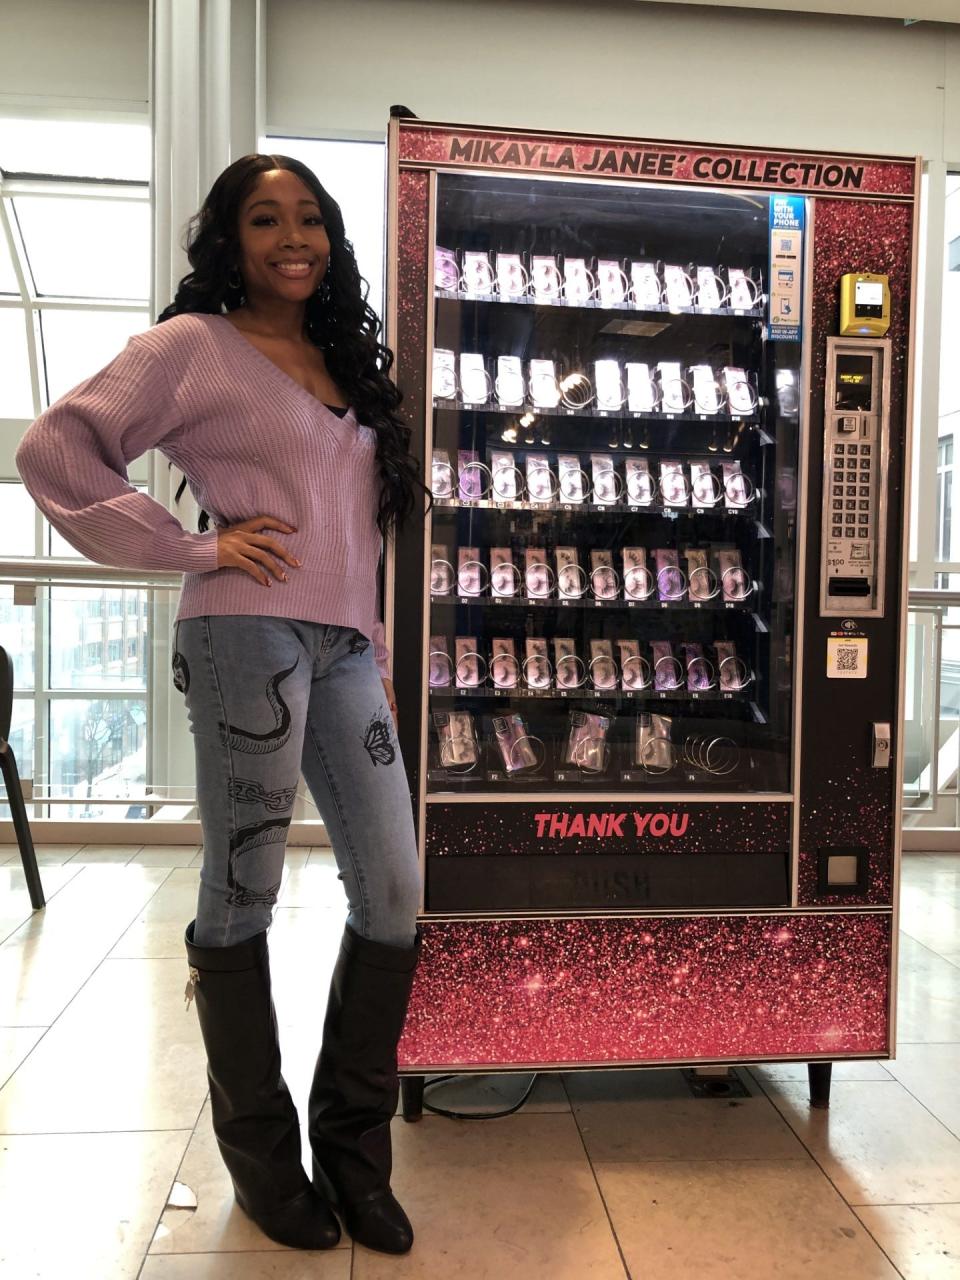 Mikayla Walker placed a vending machine on the third floor of Circle Centre Mall to sell false eyelashes and other beauty products from her Mikayla Janee Collection.